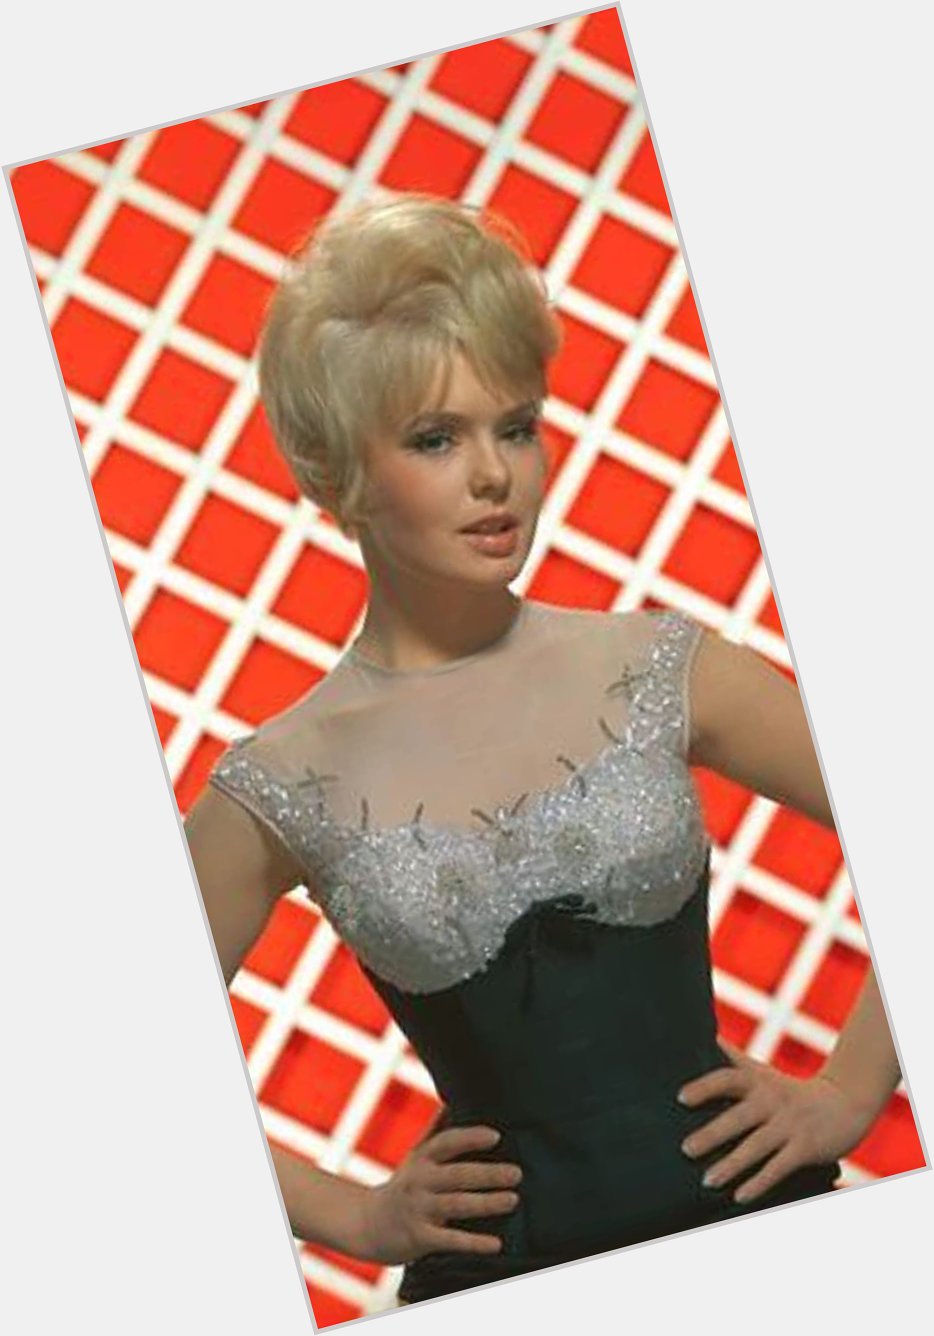 Happy birthday to Joey Heatherton, who turns 78 today! I remember her well from the variety shows of the 1970s. 